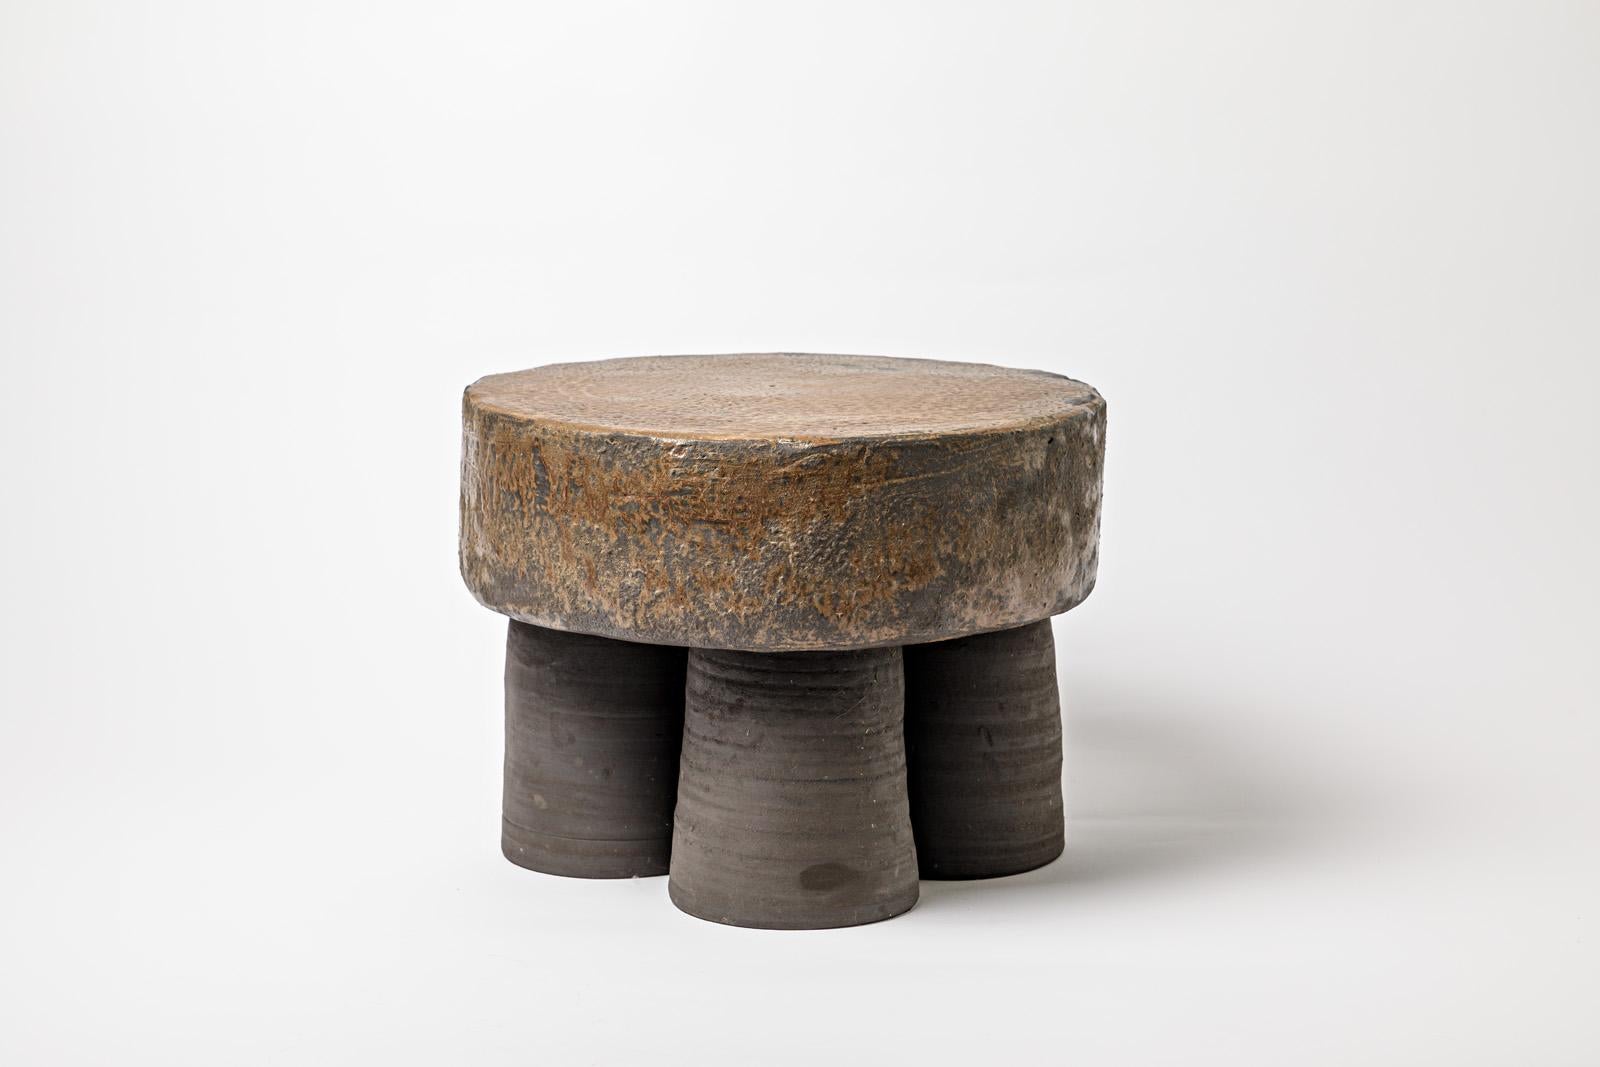 Brown glazed ceramic stool or coffee table by Mia Jensen. 
Artist signature under the base. 2023.
H : 11.02’ x 14.9’ inches.